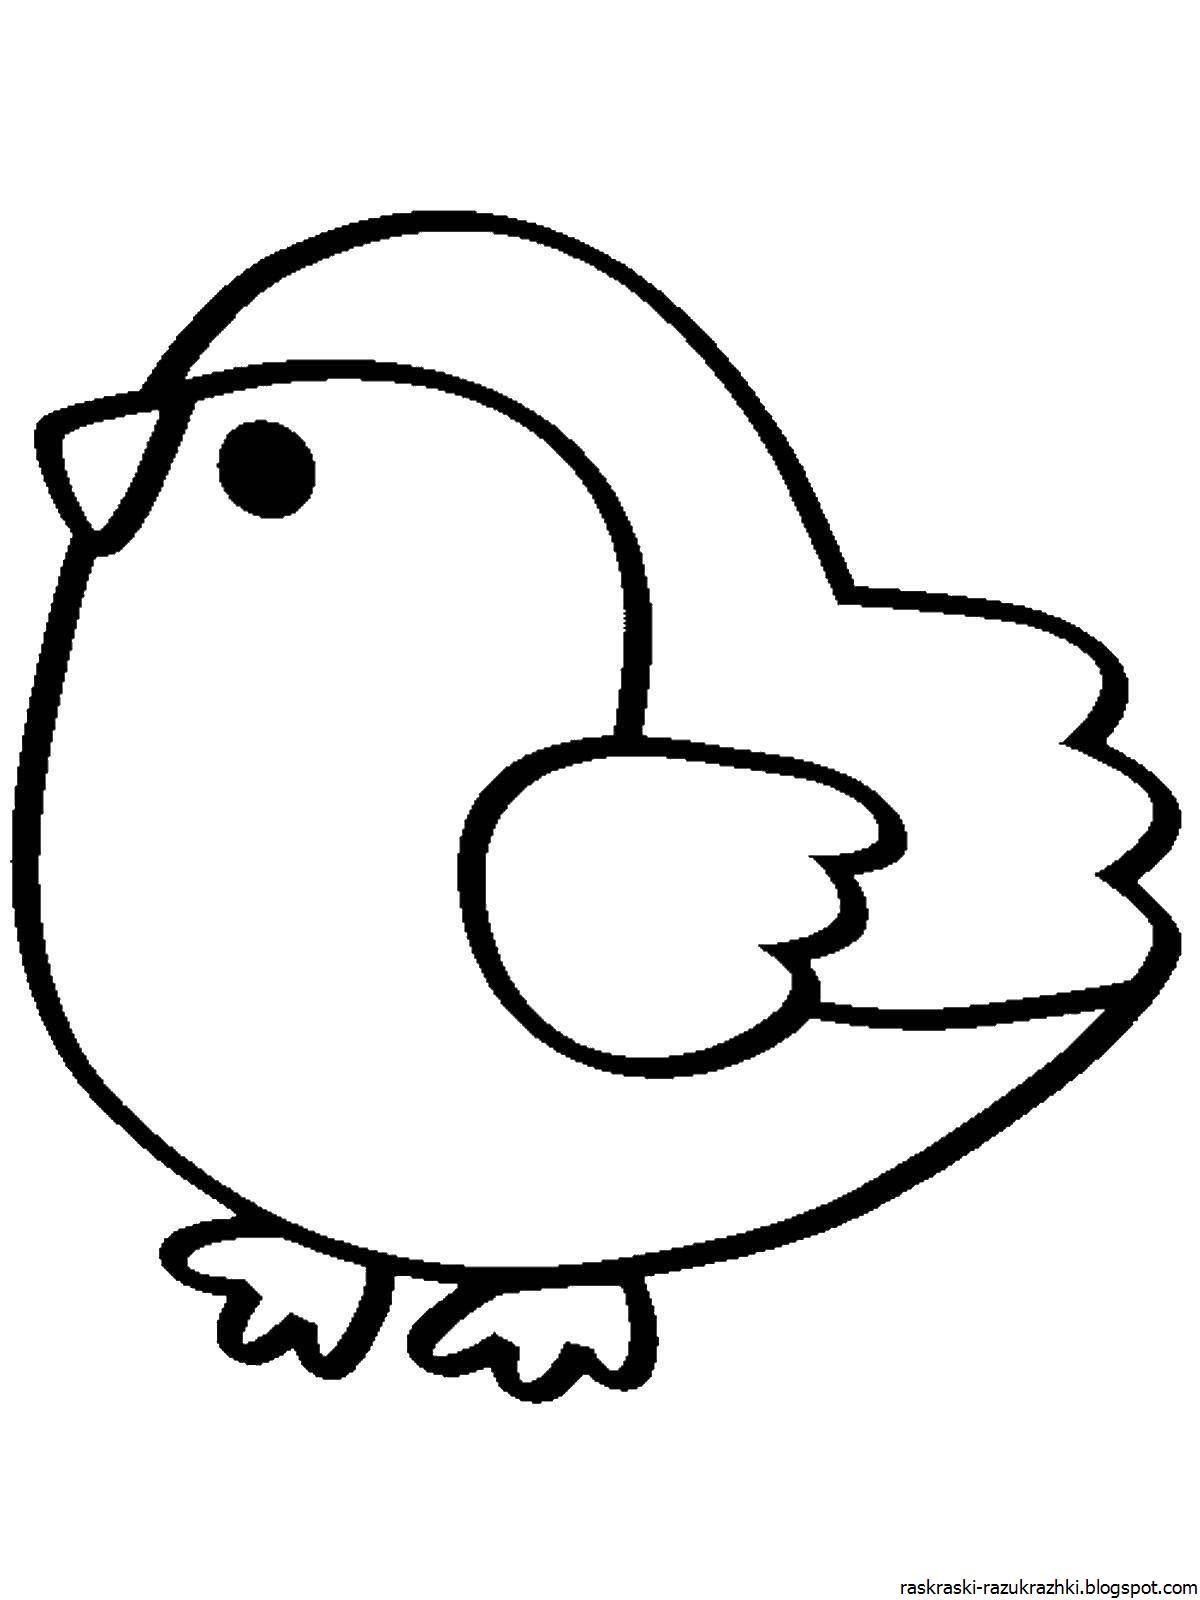 Bright bird coloring page for 3-4 year olds